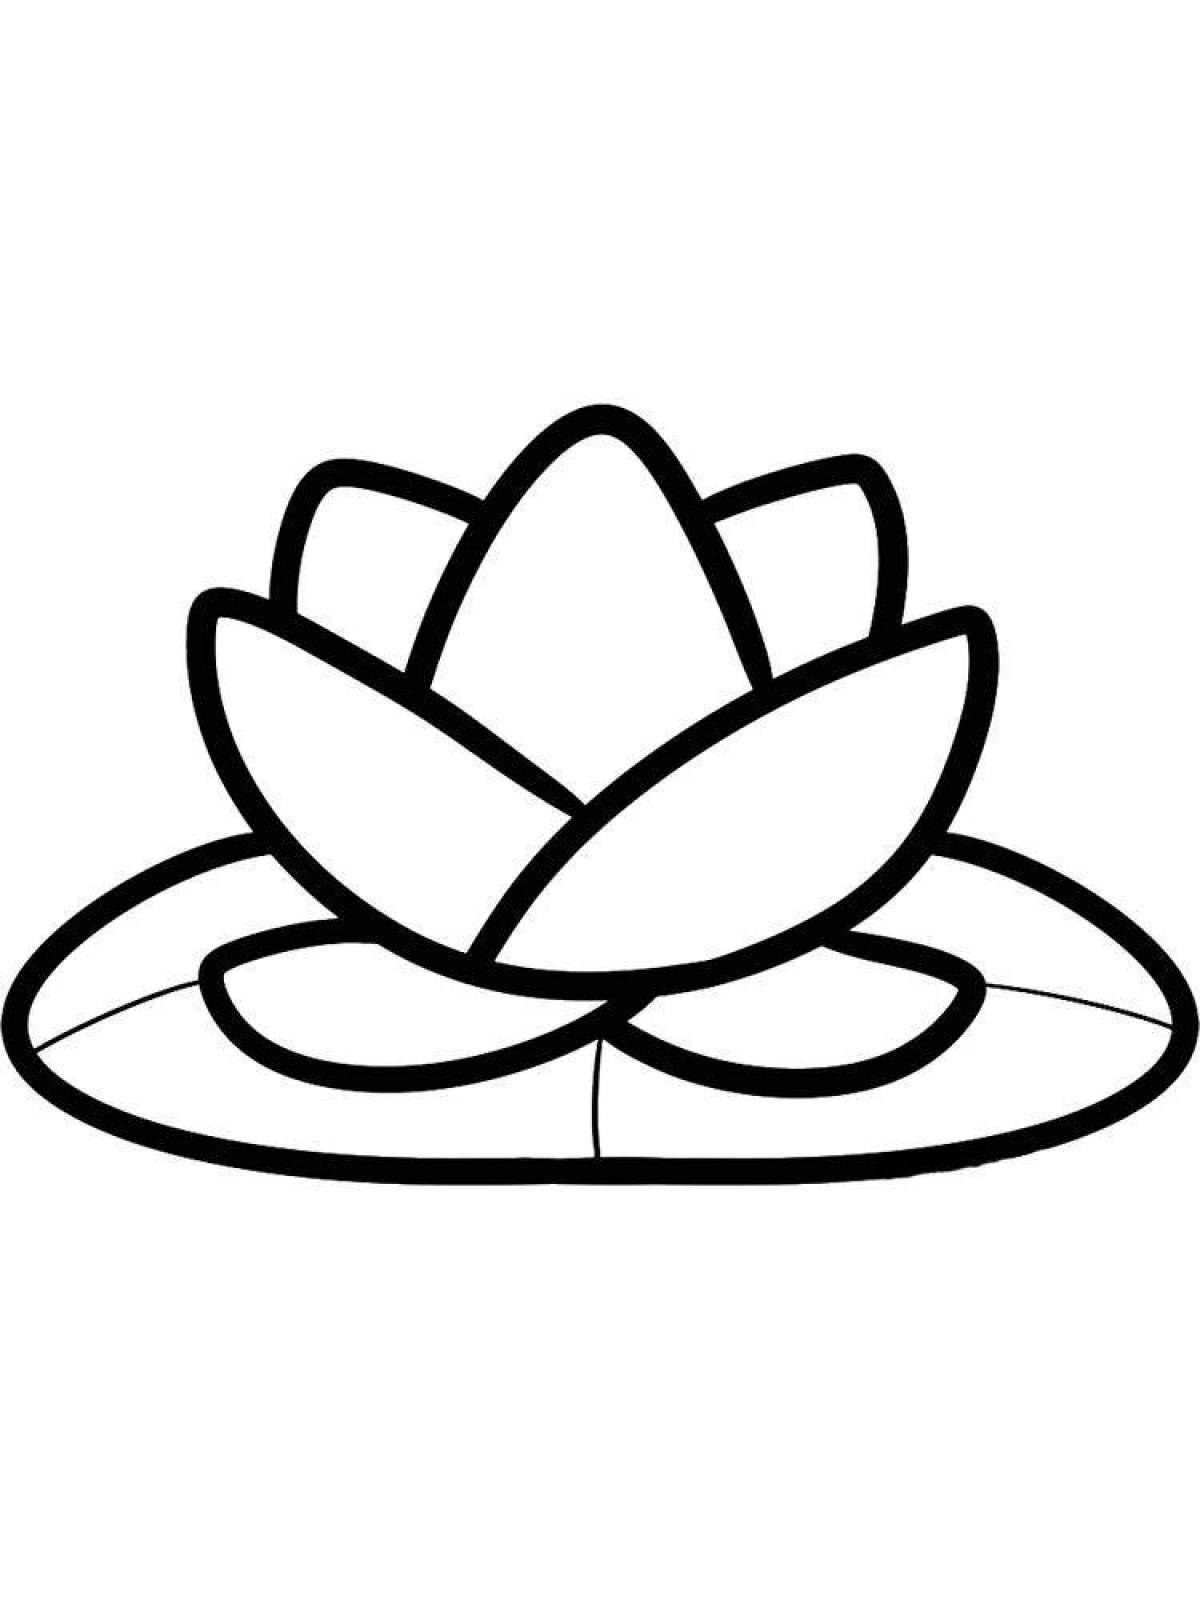 Lucky lotus coloring page